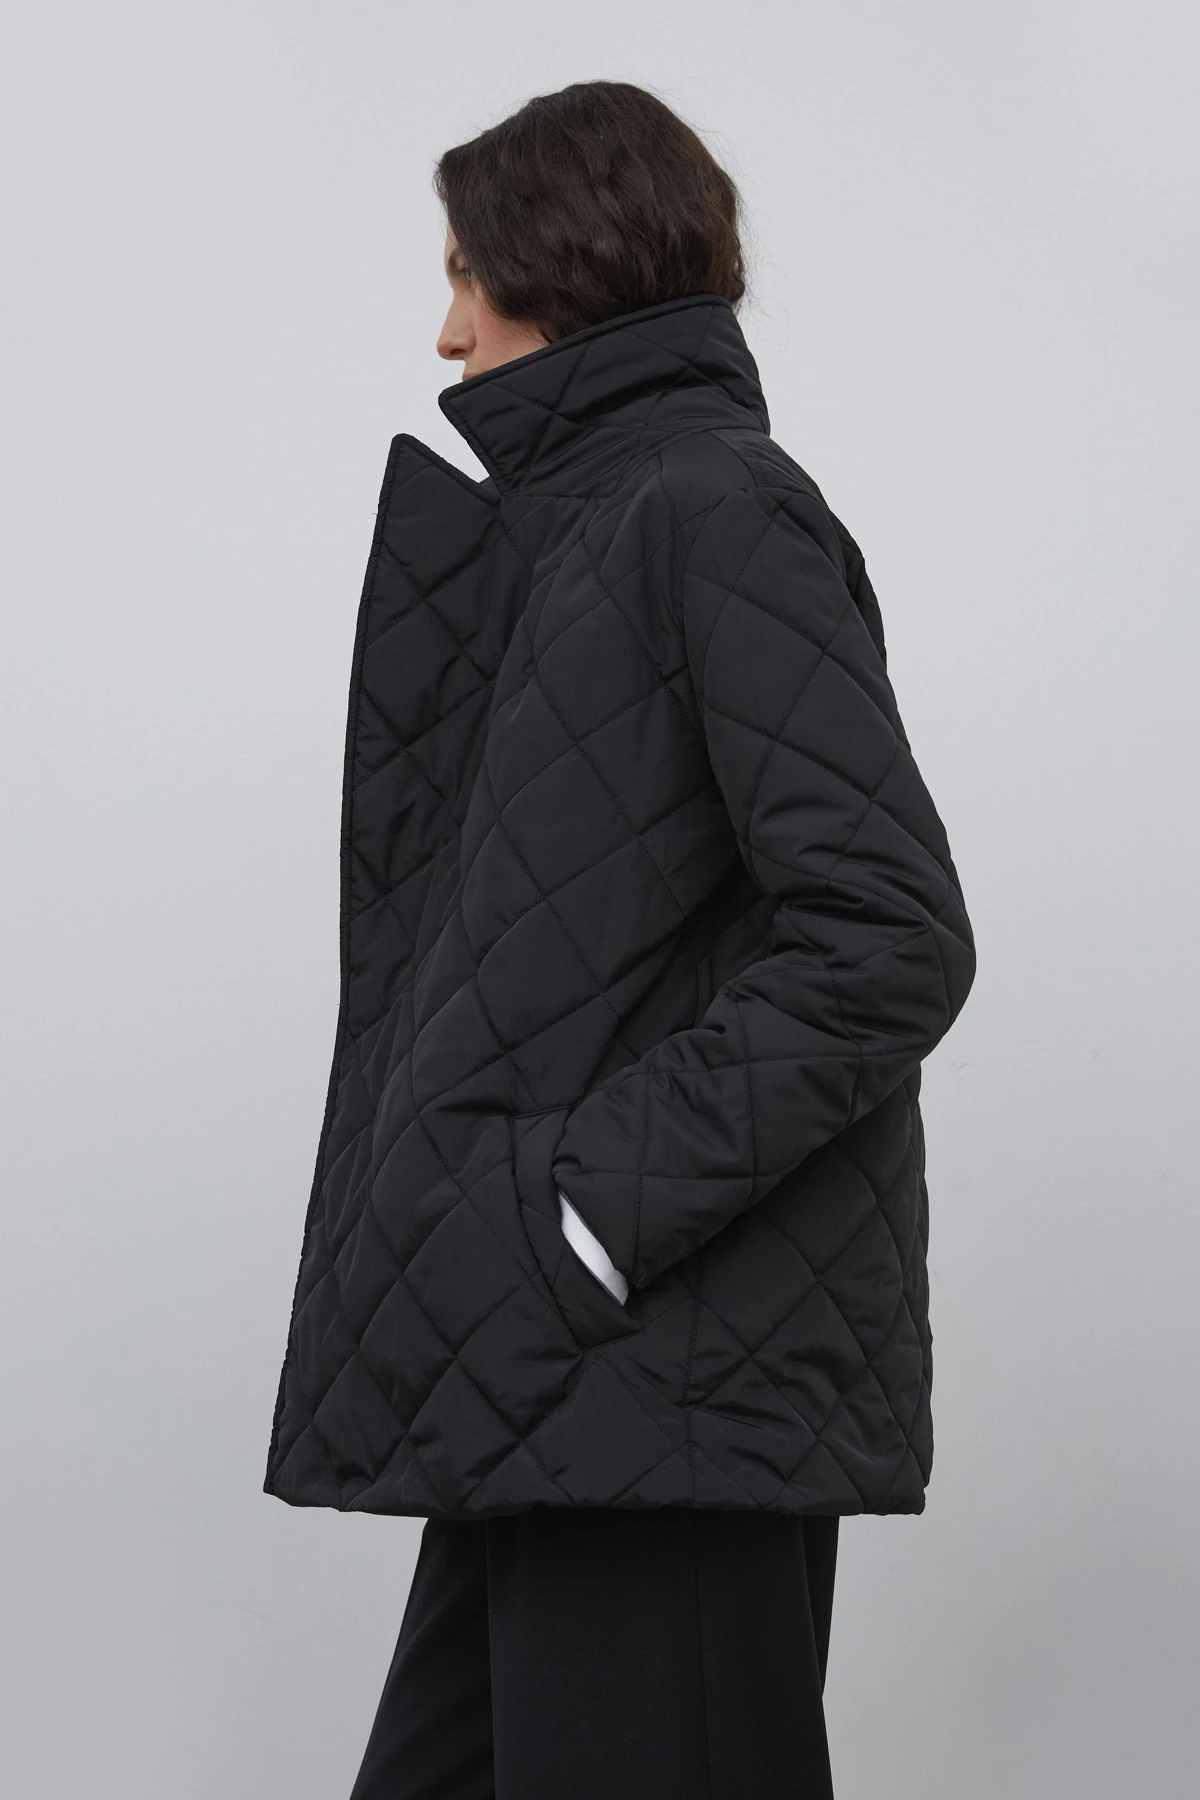 Black quilted jacket with with padding and belt, photo 5